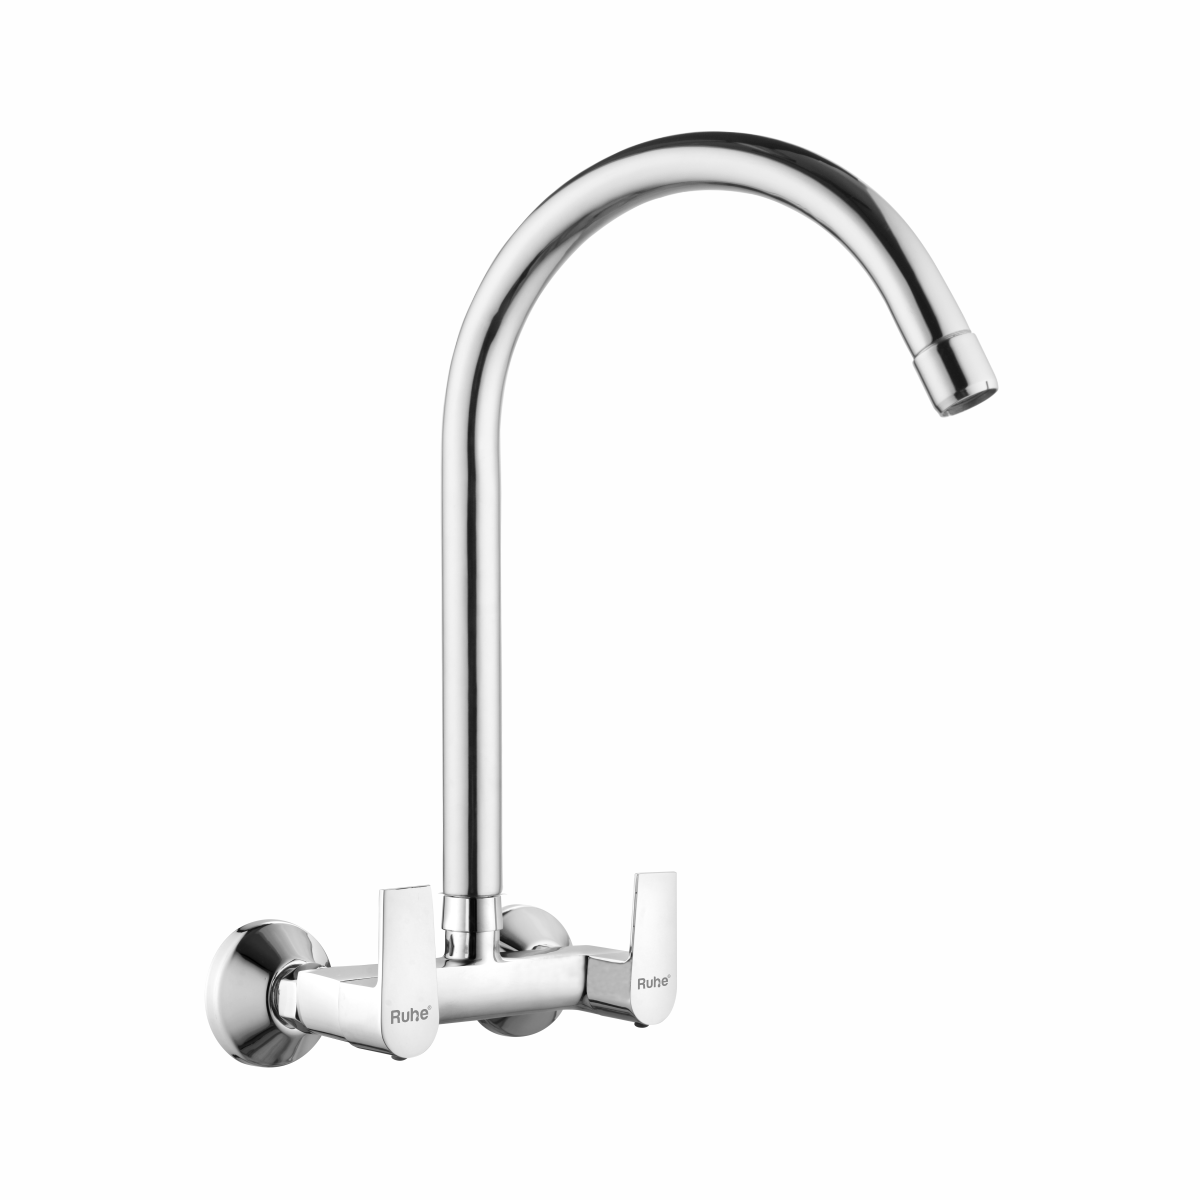 Elixir Sink Mixer with Large (20 inches) Round Swivel Spout Brass Faucet